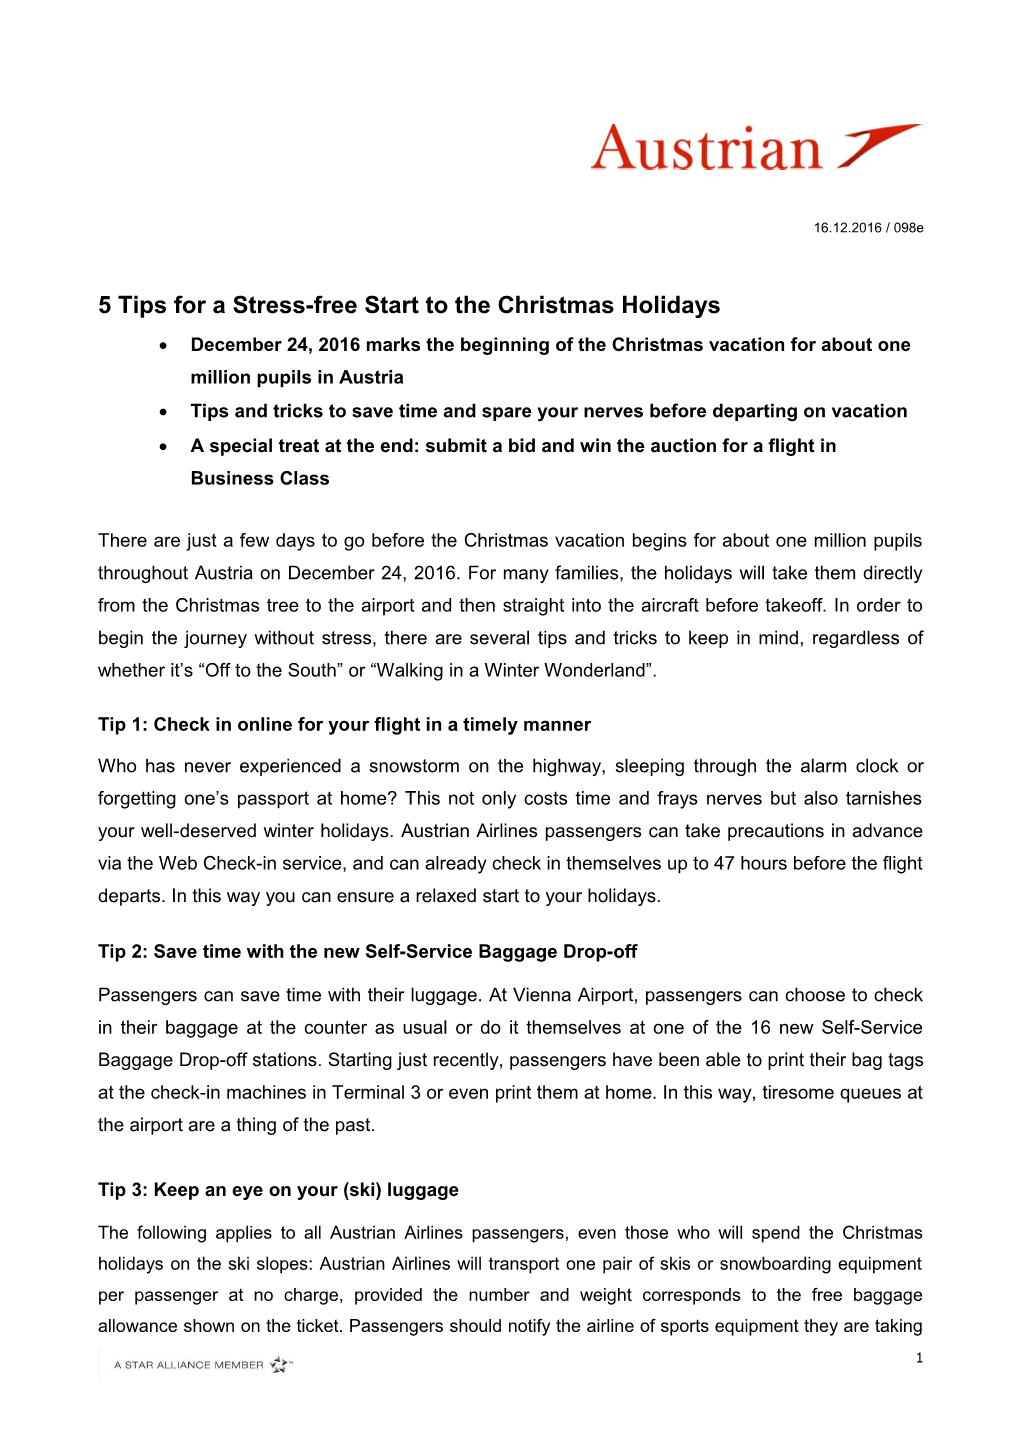 5 Tips for a Stress-Free Start to the Christmas Holidays